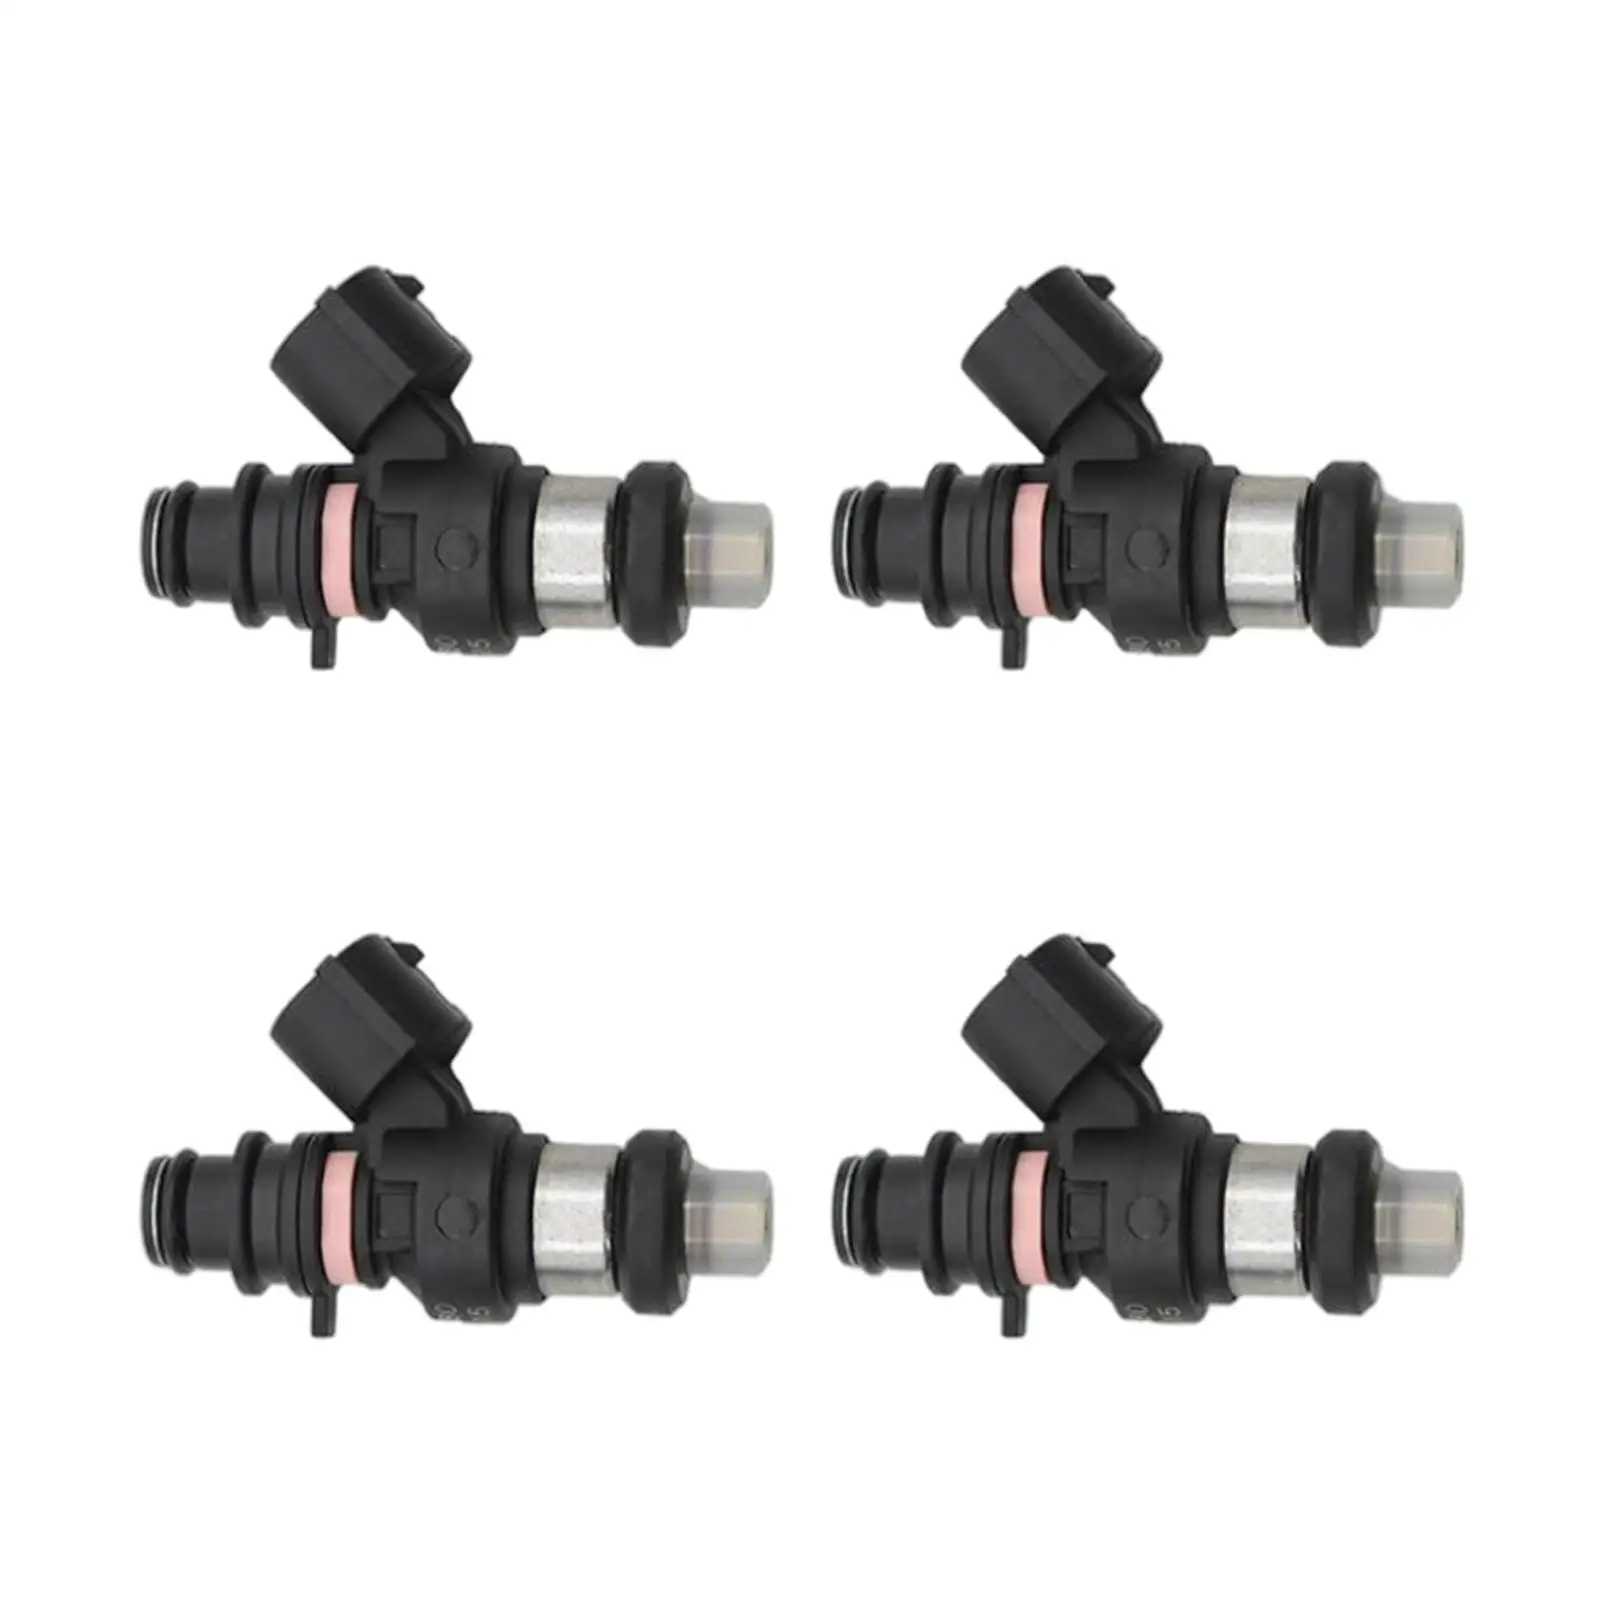 

Fuel Injector Fbycg80 16600-Aa270 8008212 Injectors Fit for Impreza RX 07-12 2.0L H4 EJ20 Replaces Replacement